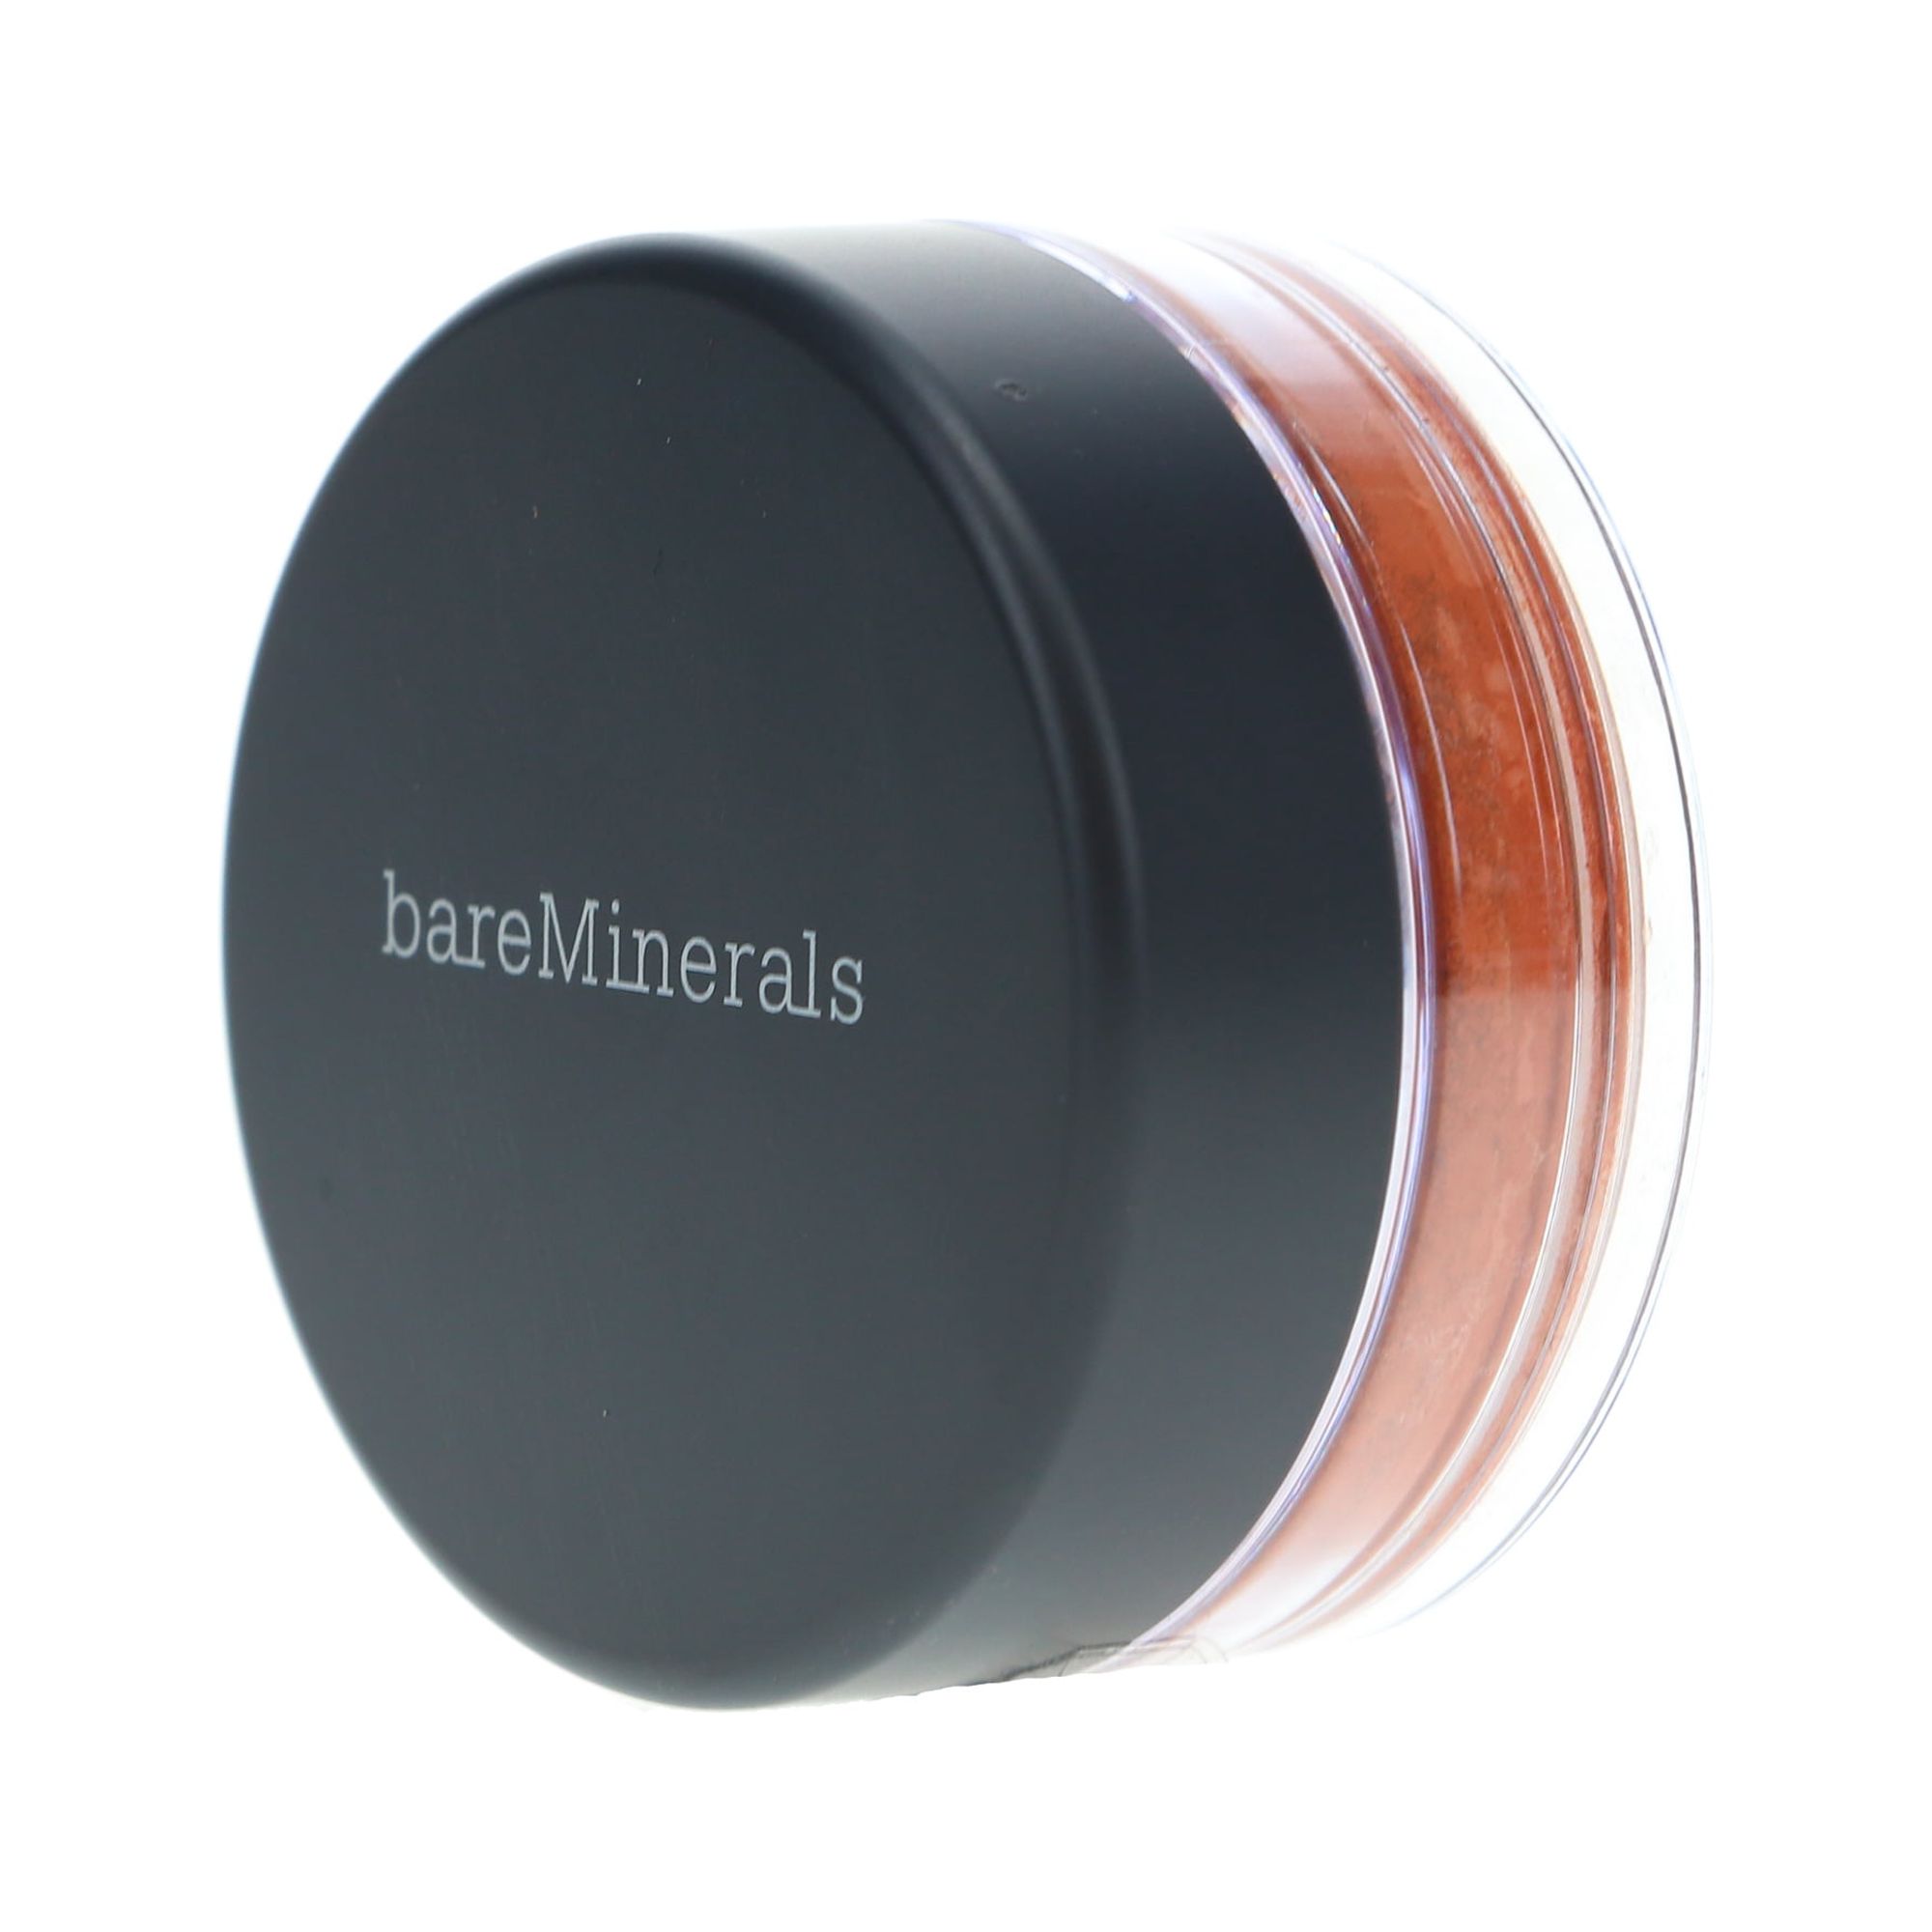 All-Over Face Color - Warmth by bareMinerals for Women - 0.05 oz Powder - image 1 of 8